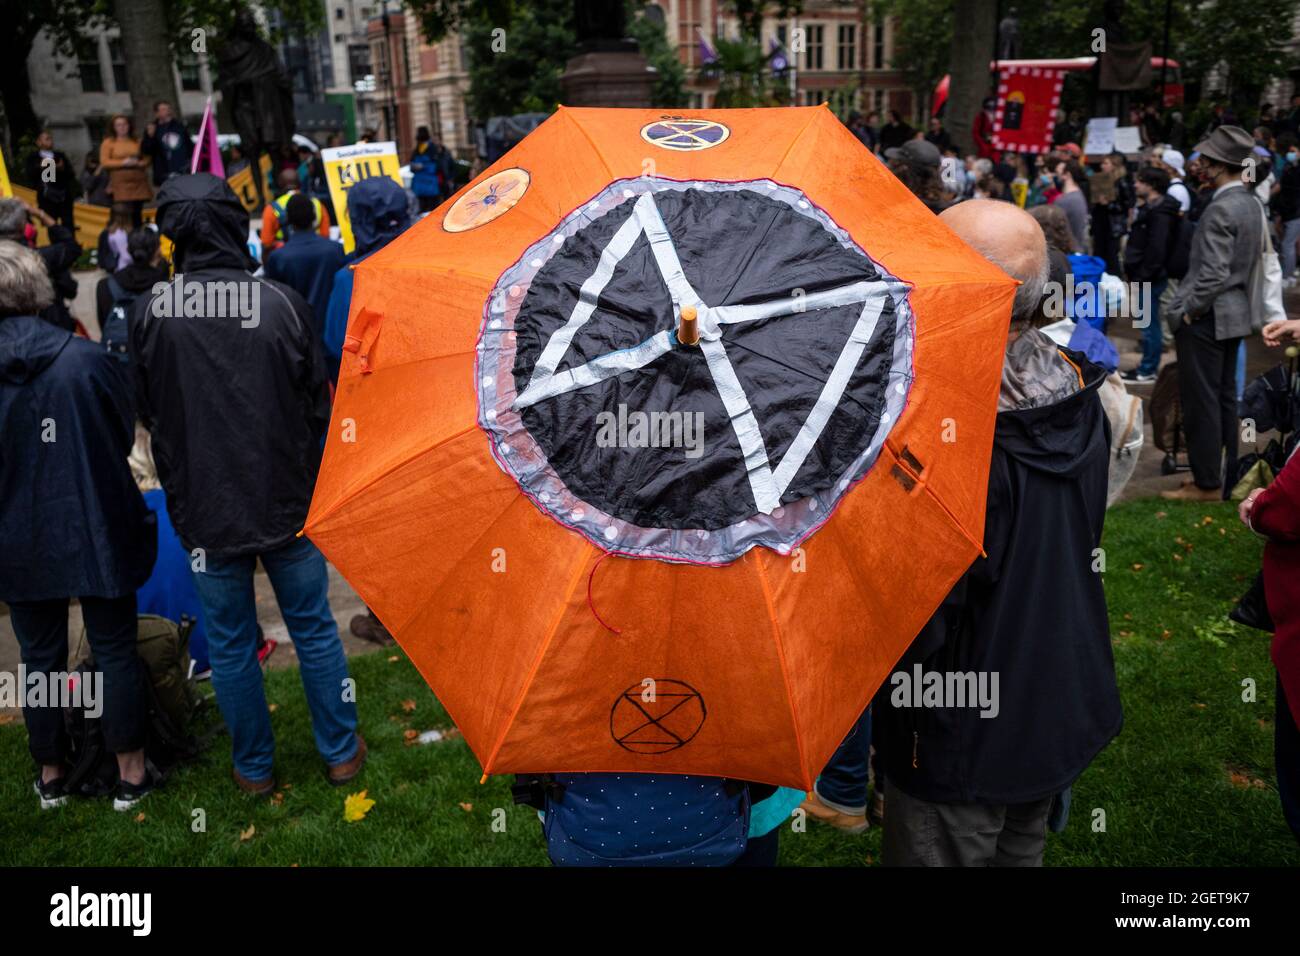 London, UK.  21 August 2021. A person with an umbrella bearing the Extinction Rebellion logo at a Kill the Bill protest in Parliament Square where people are campaigning against the Police, Crime, Sentencing and Courts Bill Government Bill.  Members of climate activists Extinction Rebellion (XR) are also present ahead of reported climate protests targeting the City of London next week.  Credit: Stephen Chung / Alamy Live News Stock Photo